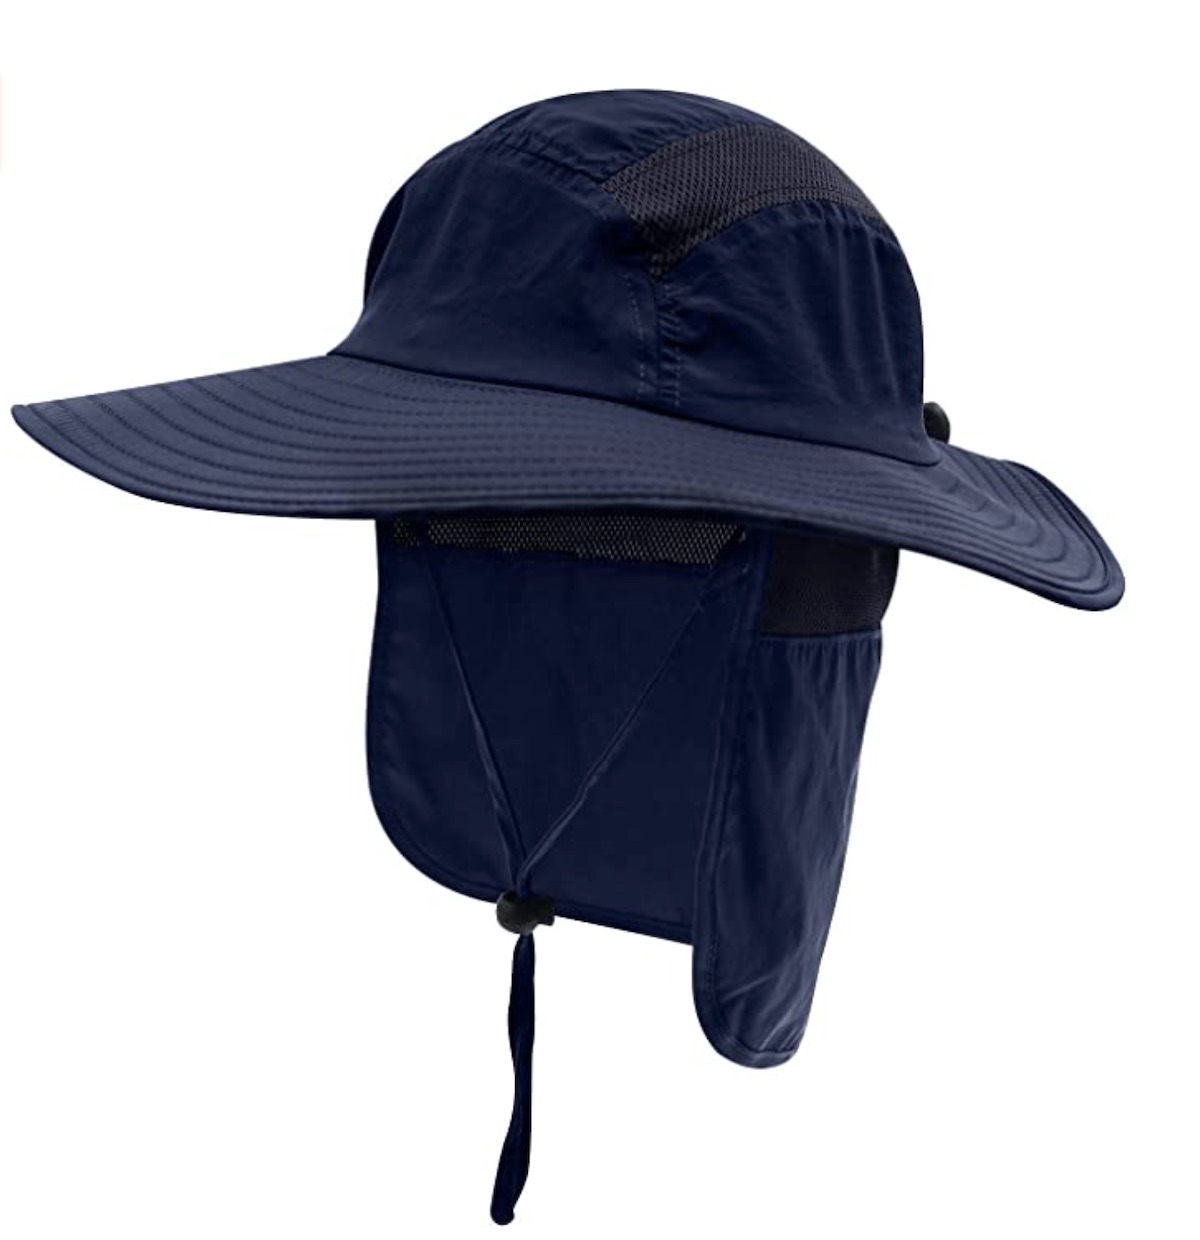 Pesaat Sun Hat Children Adults Summer Hat UV Protection Summer Hat Crushable Waterproof Fishing Hat with Chin Strap Garden Hat Boonie Hat Women for Gardening Travel Hiking Fishing